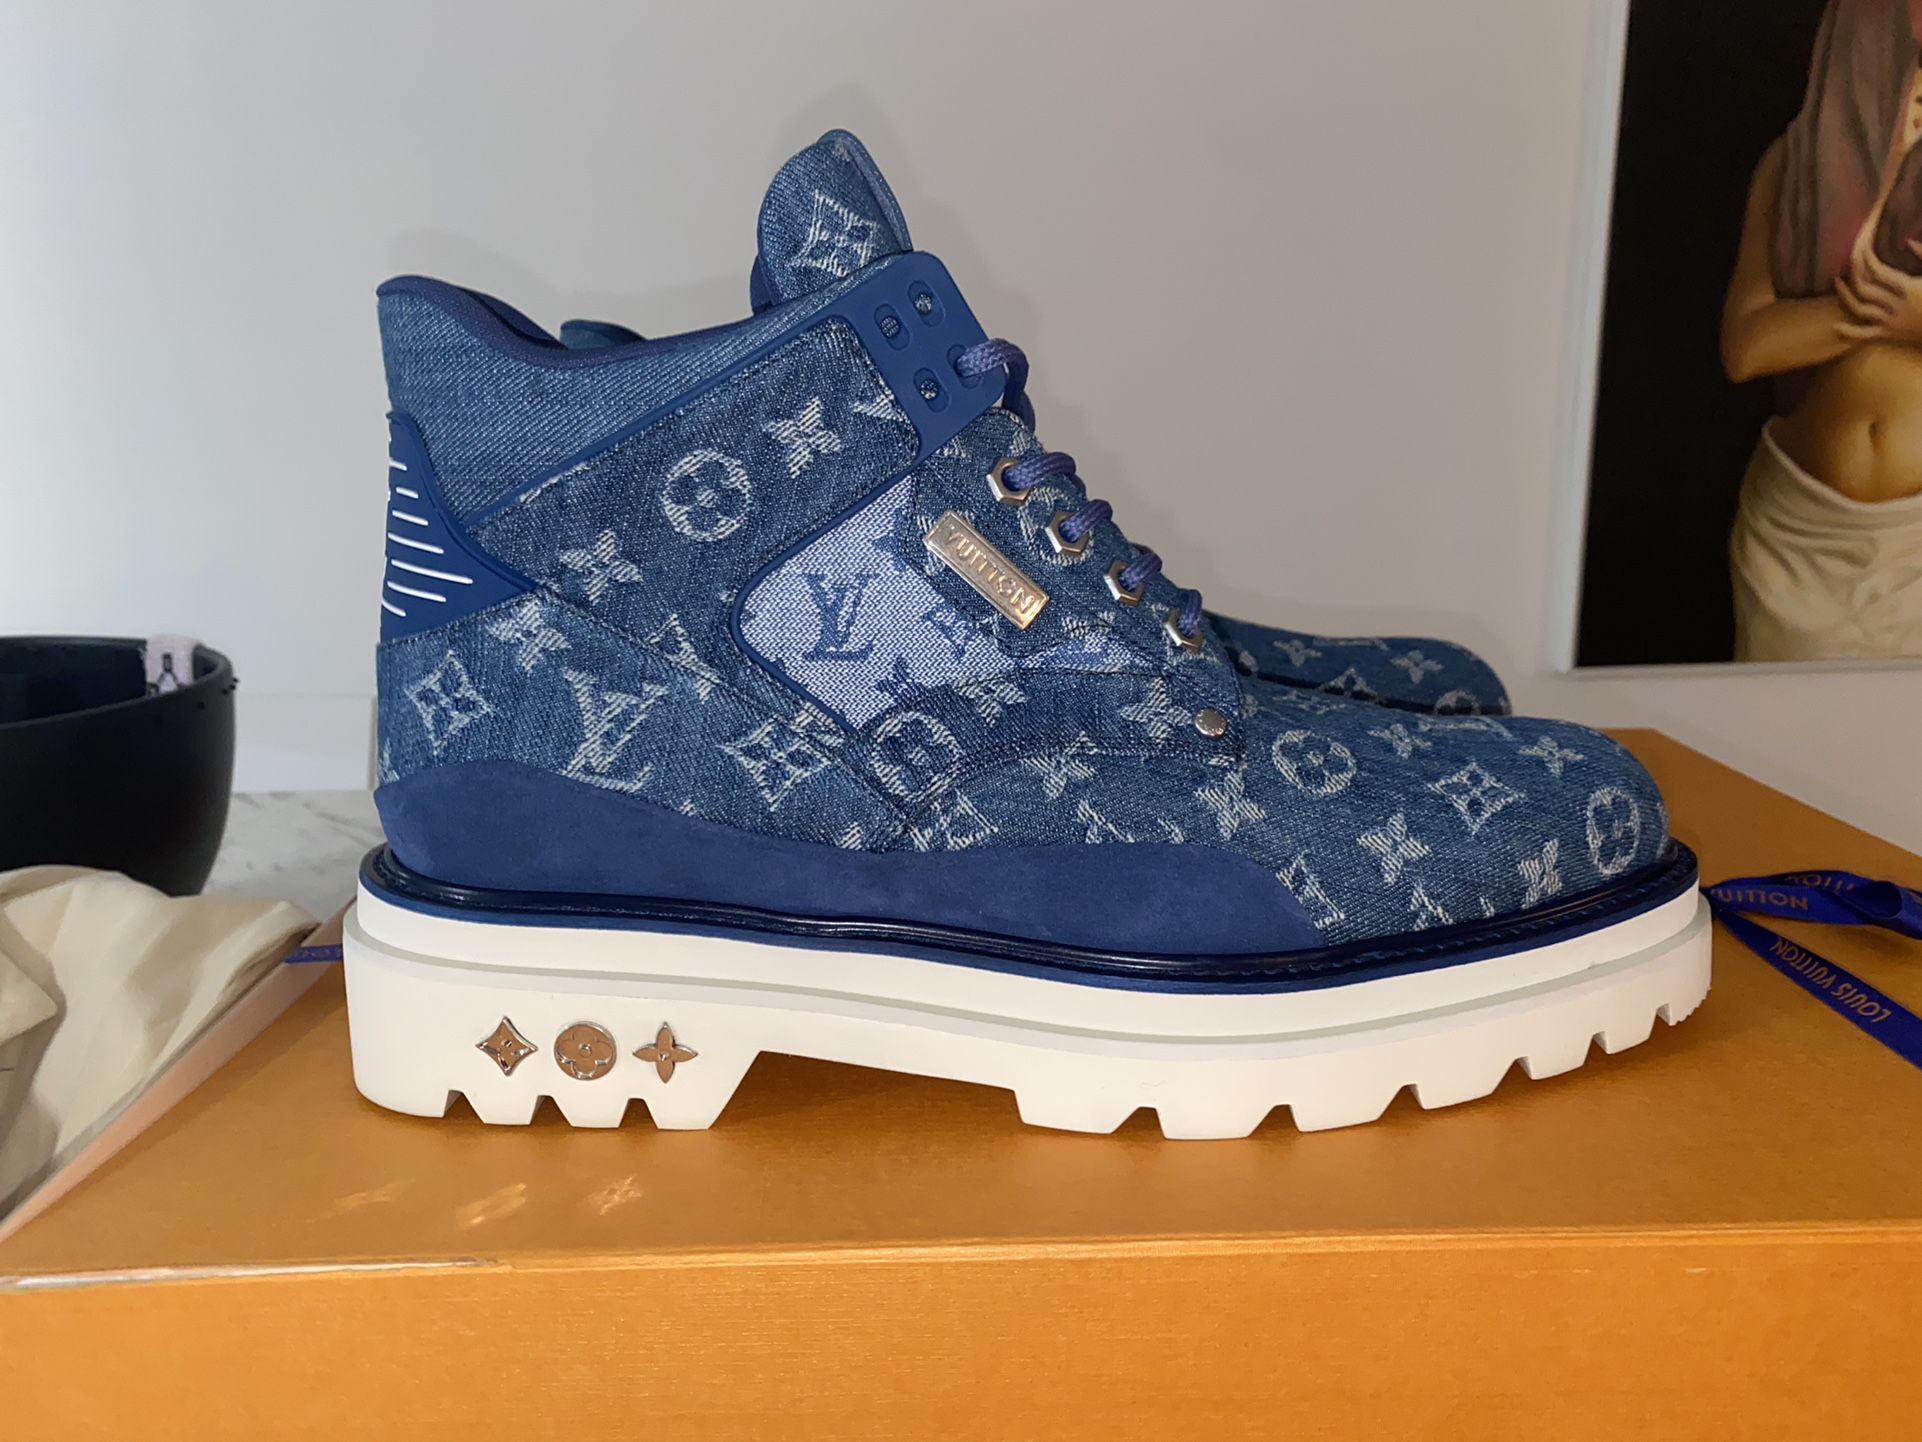 Louis Vuitton LV Boots for Sale in Indianapolis, IN - OfferUp